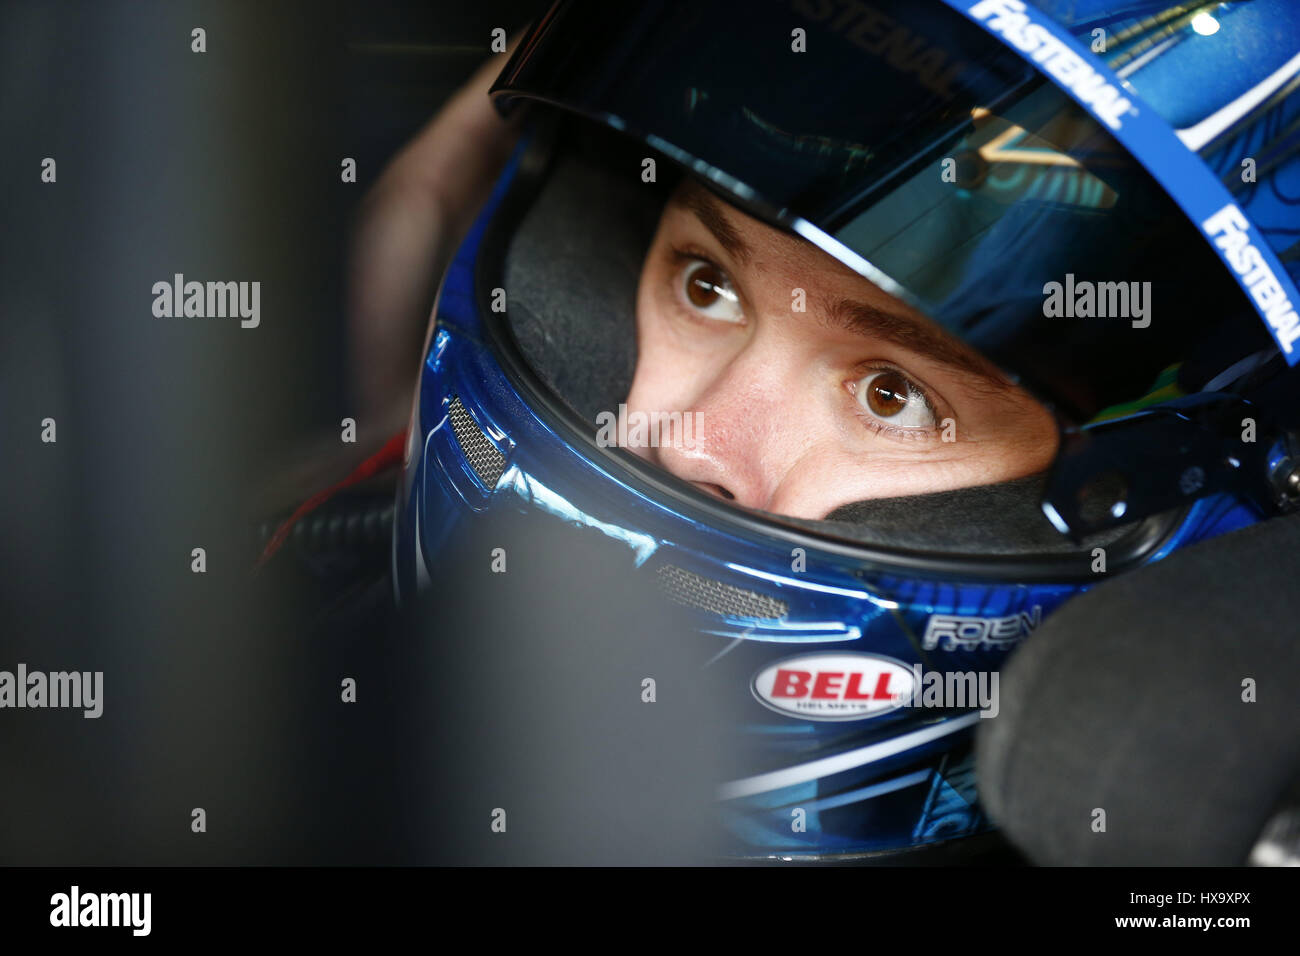 Fontana, California, USA. 25th Mar, 2017. March 25, 2017 - Fontana, California, USA: Ricky Stenhouse Jr. (17) hangs out in the garage during practice for the Auto Club 400 at Auto Club Speedway in Fontana, California. Credit: Jusitn R. Noe Asp Inc/ASP/ZUMA Wire/Alamy Live News Stock Photo